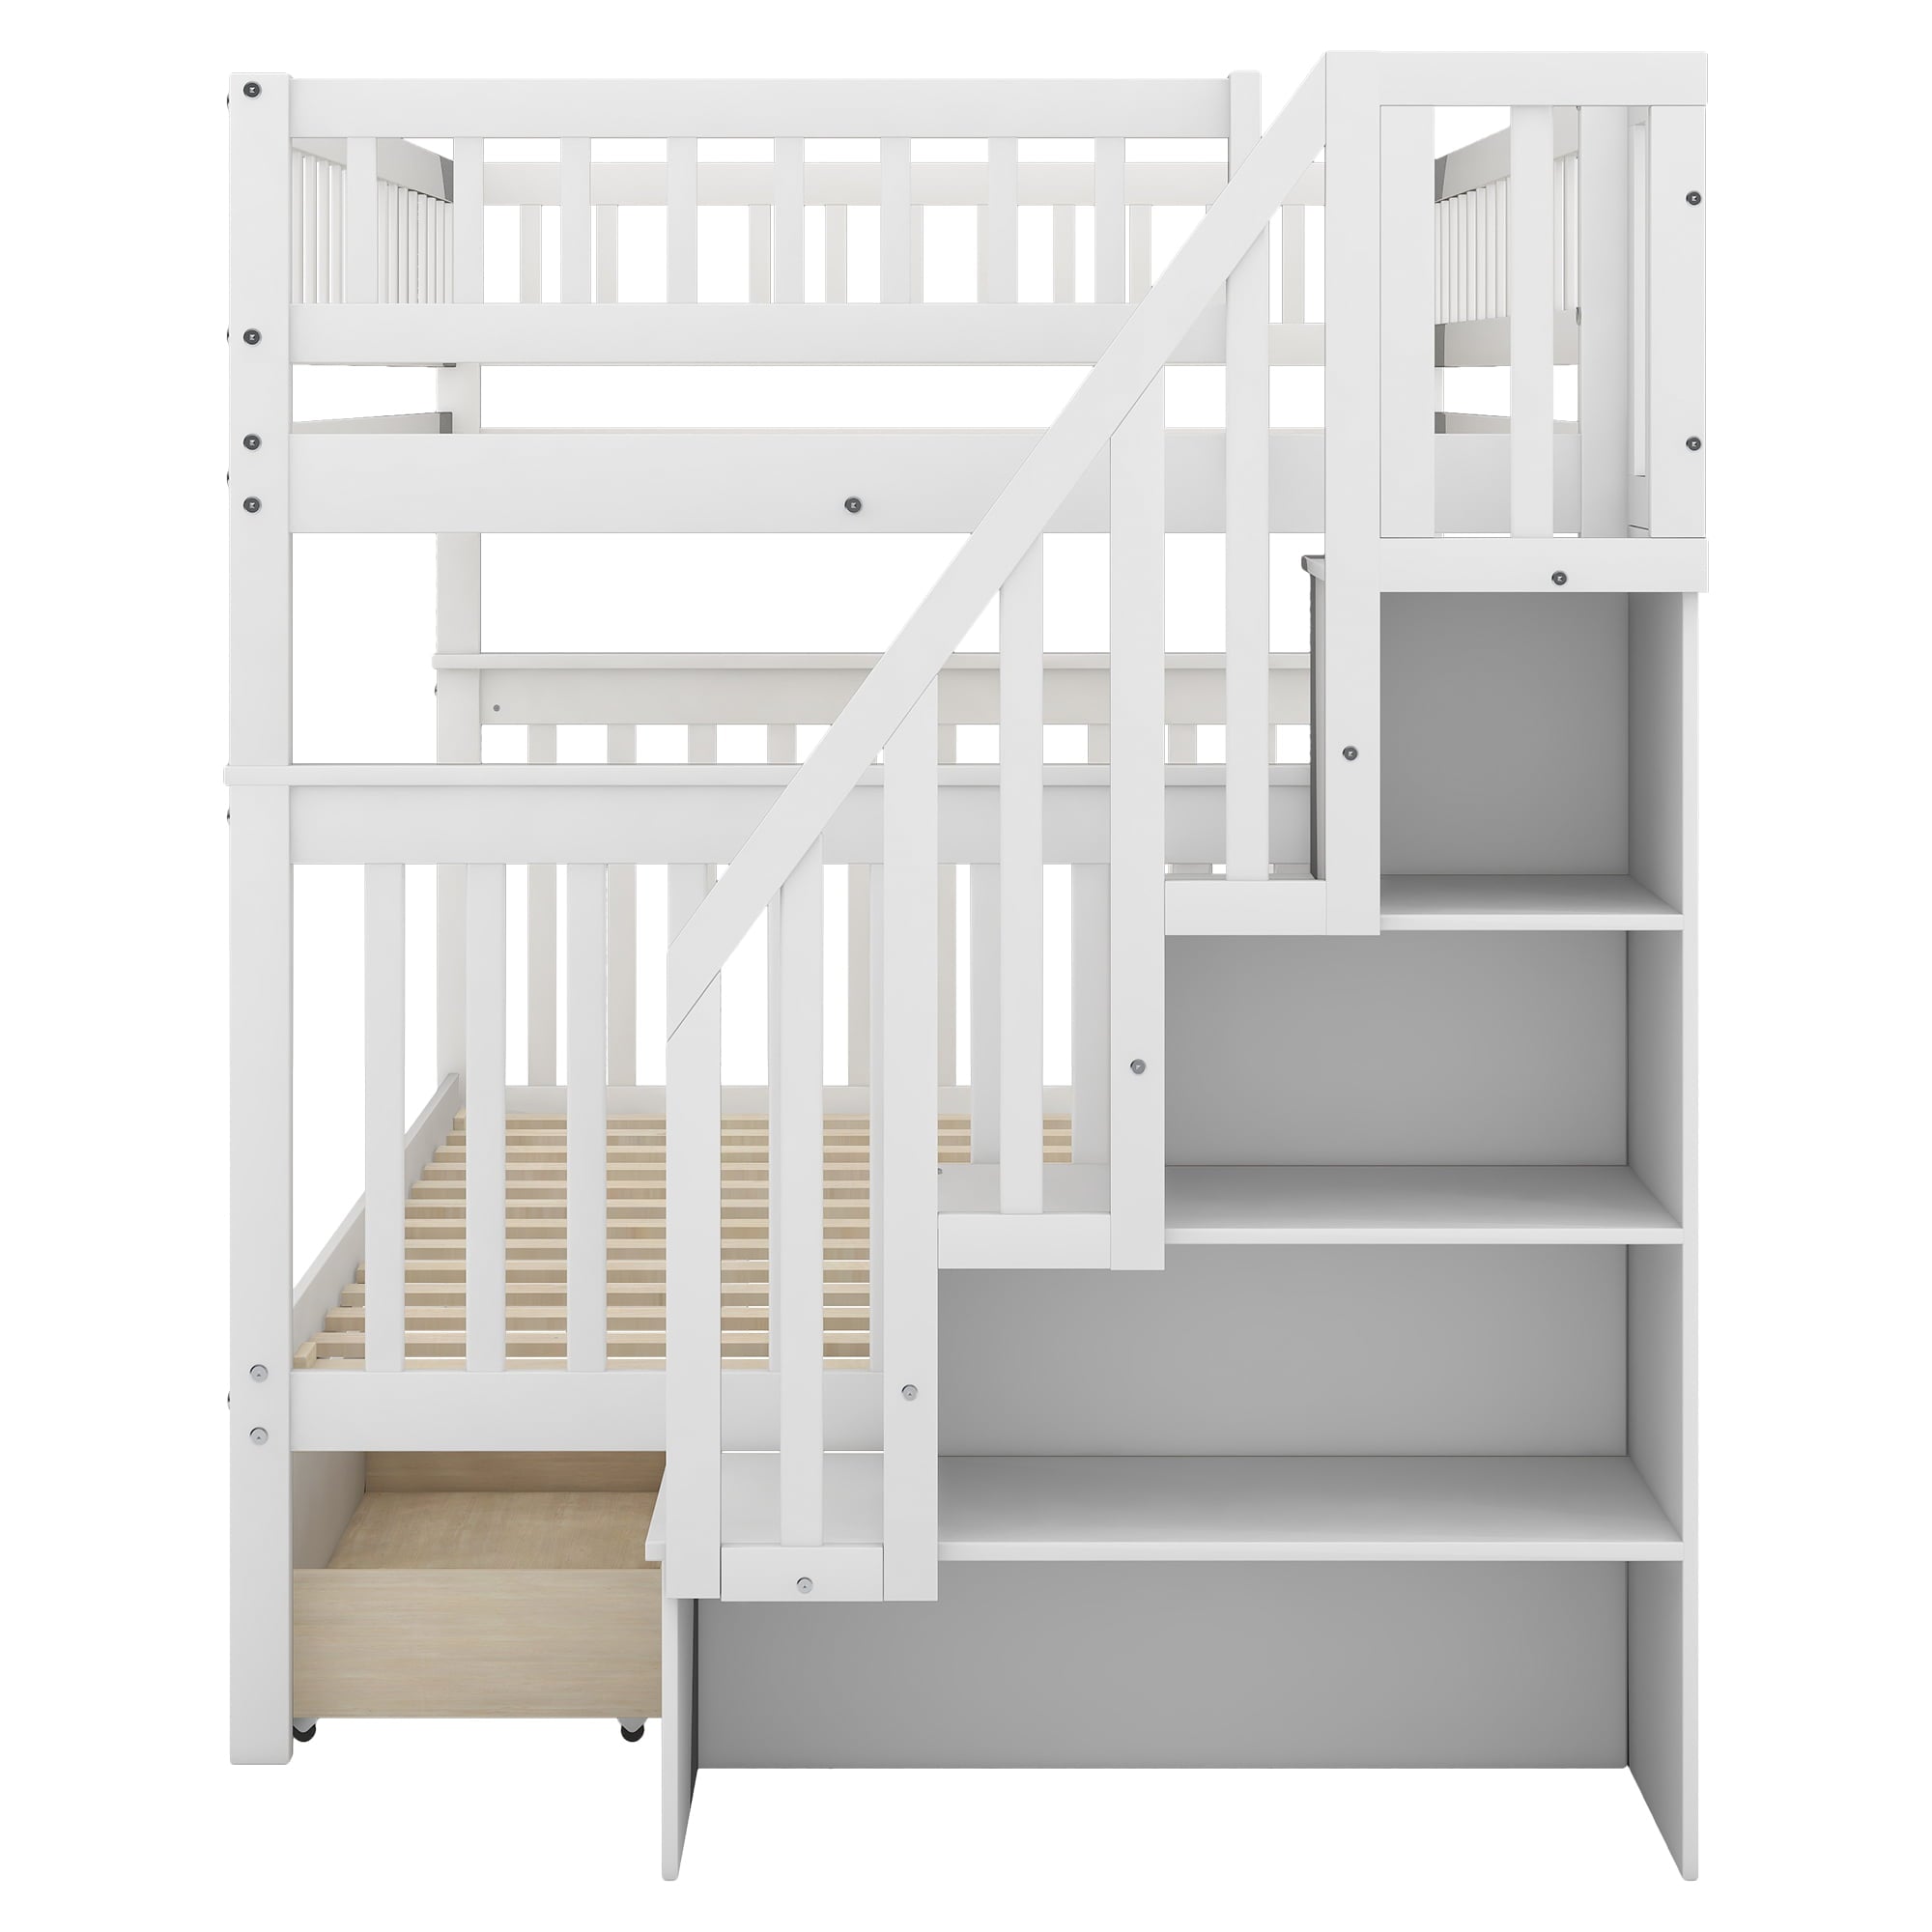 Euroco Full Over Full Bunk Bed with Storage Shelves and Drawers for Kid's Room